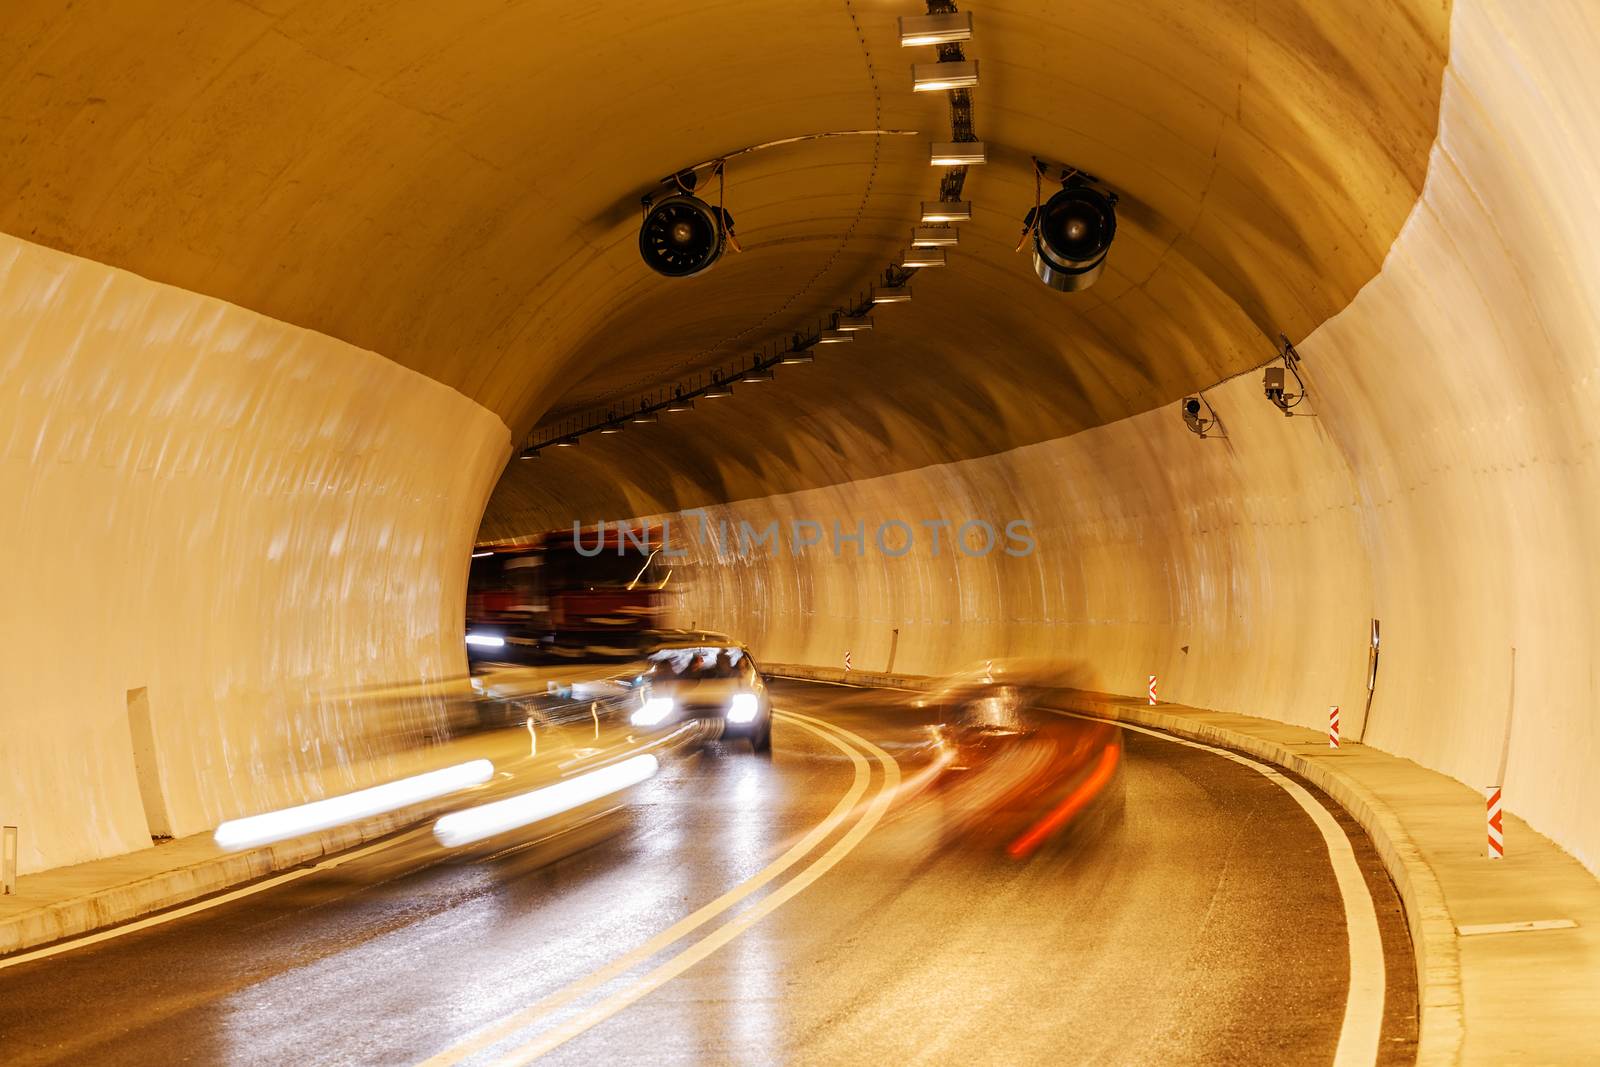 Tunnel with lights by vladimirnenezic